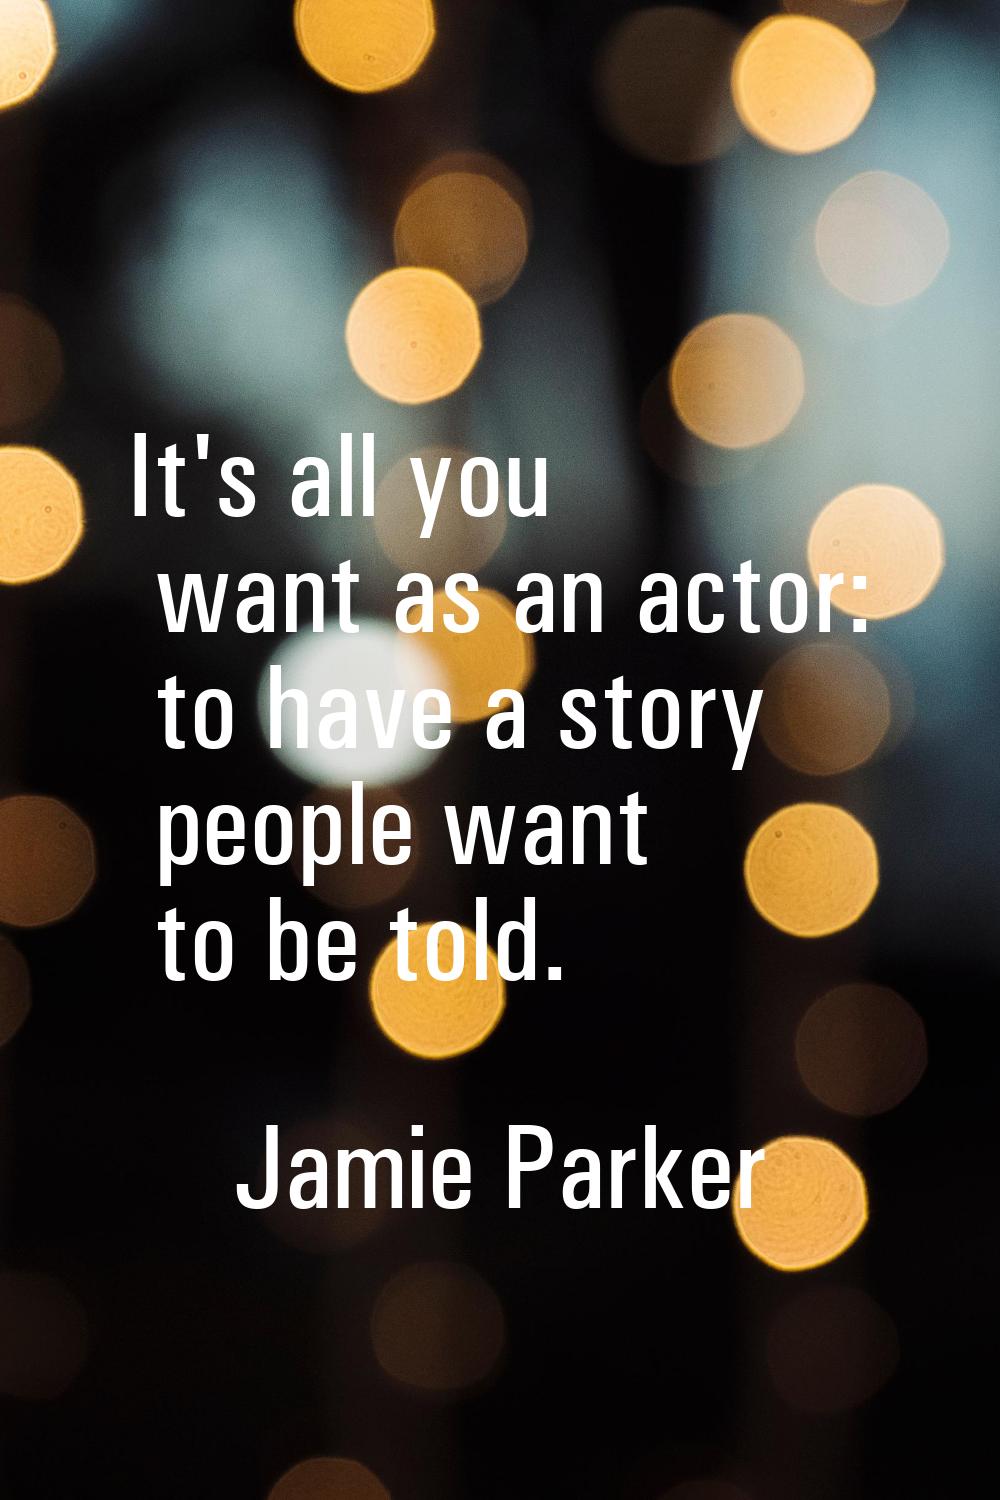 It's all you want as an actor: to have a story people want to be told.